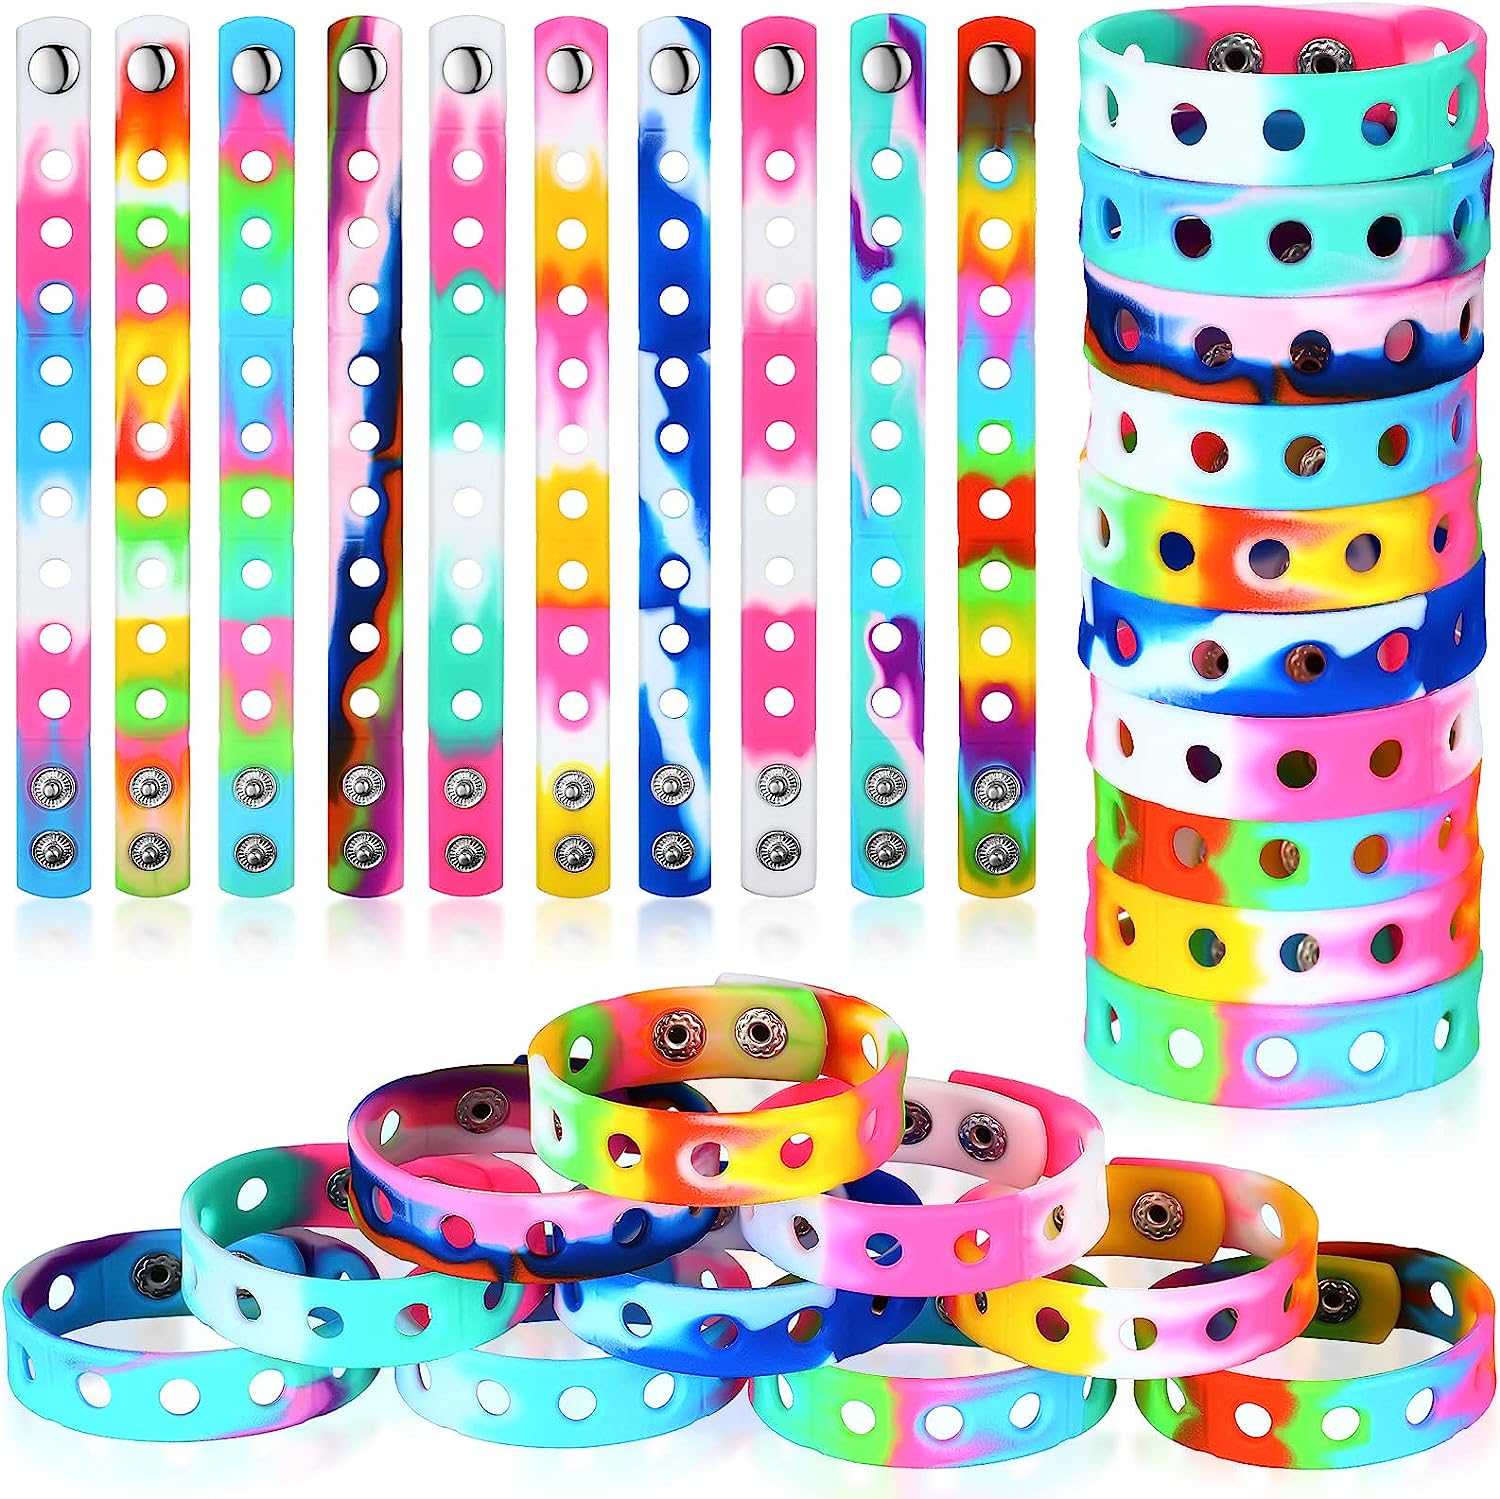 MTLEE 12 Pieces Silicone Charm Bracelets Kids Silicone Wristbands Adjustable Rubber Bracelets Colorful Cute Bracelets with Holes for Shoe Charm